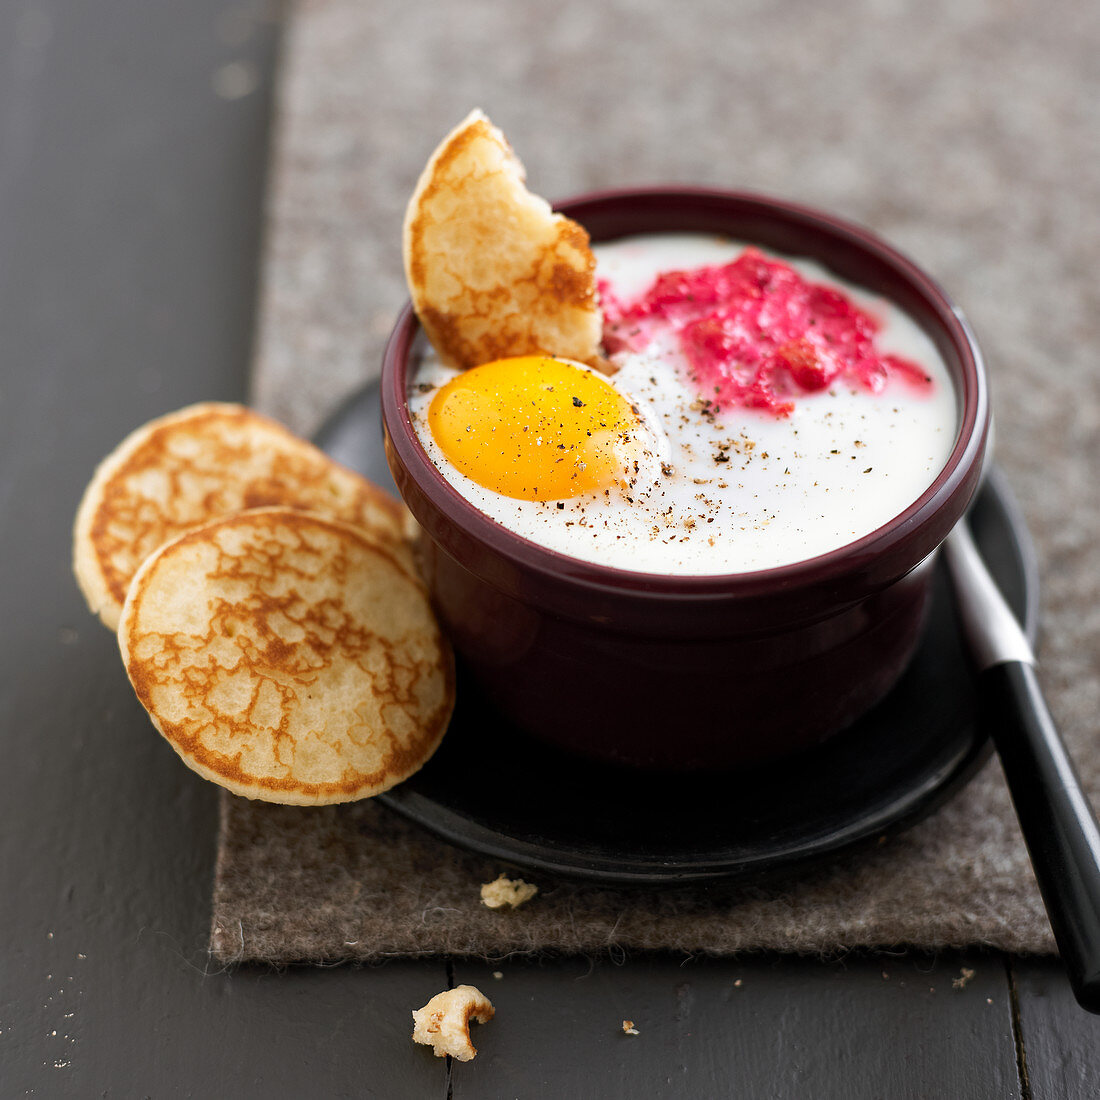 Shirred eggs with beetroot mousse